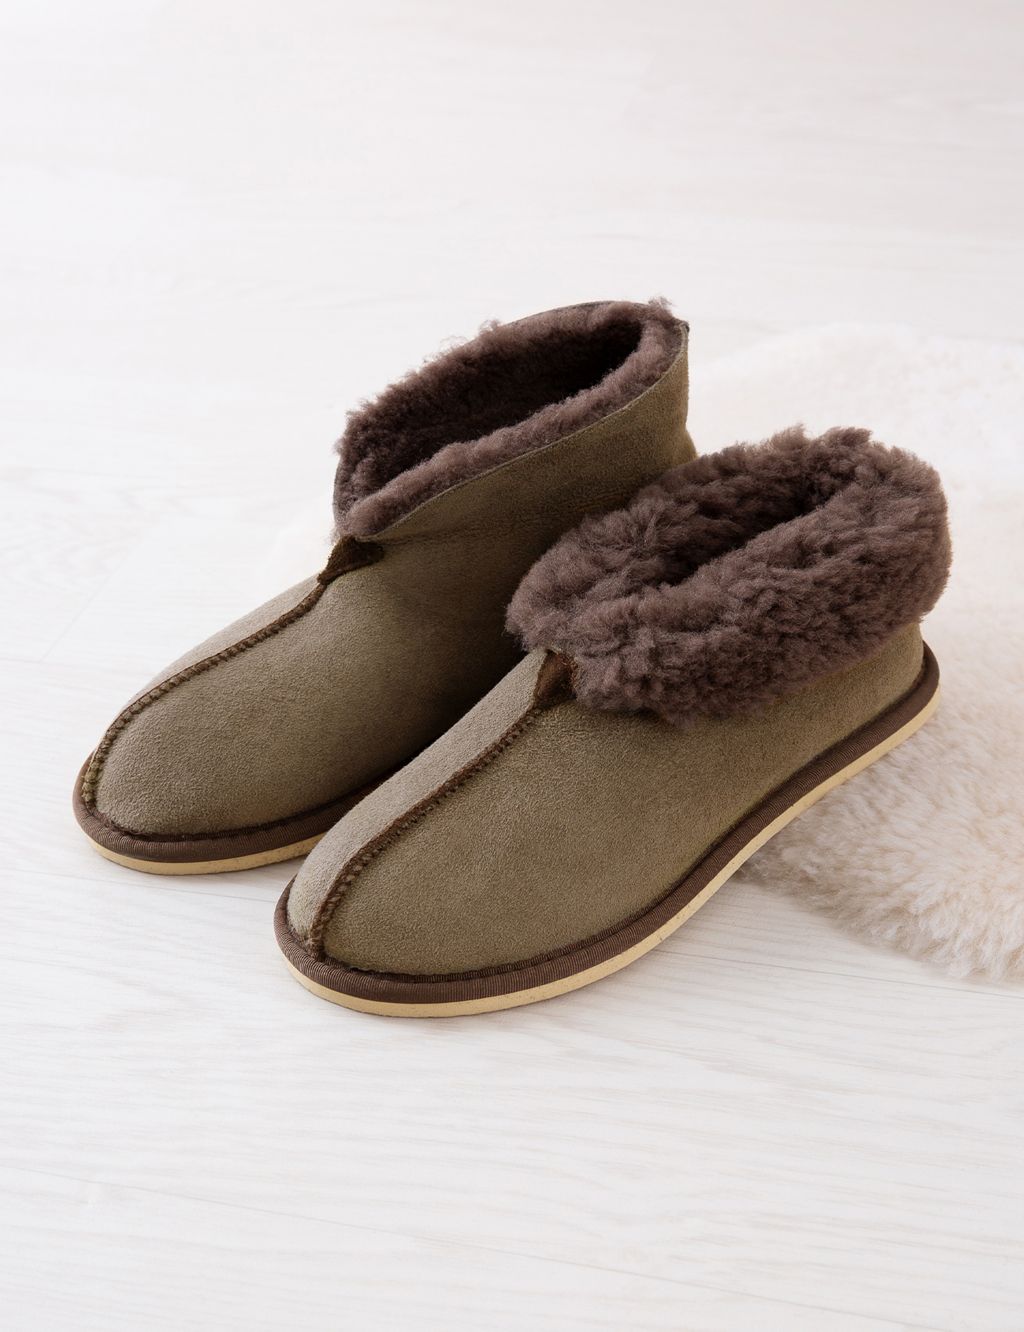 Women's Slipper Boots Available at M&S